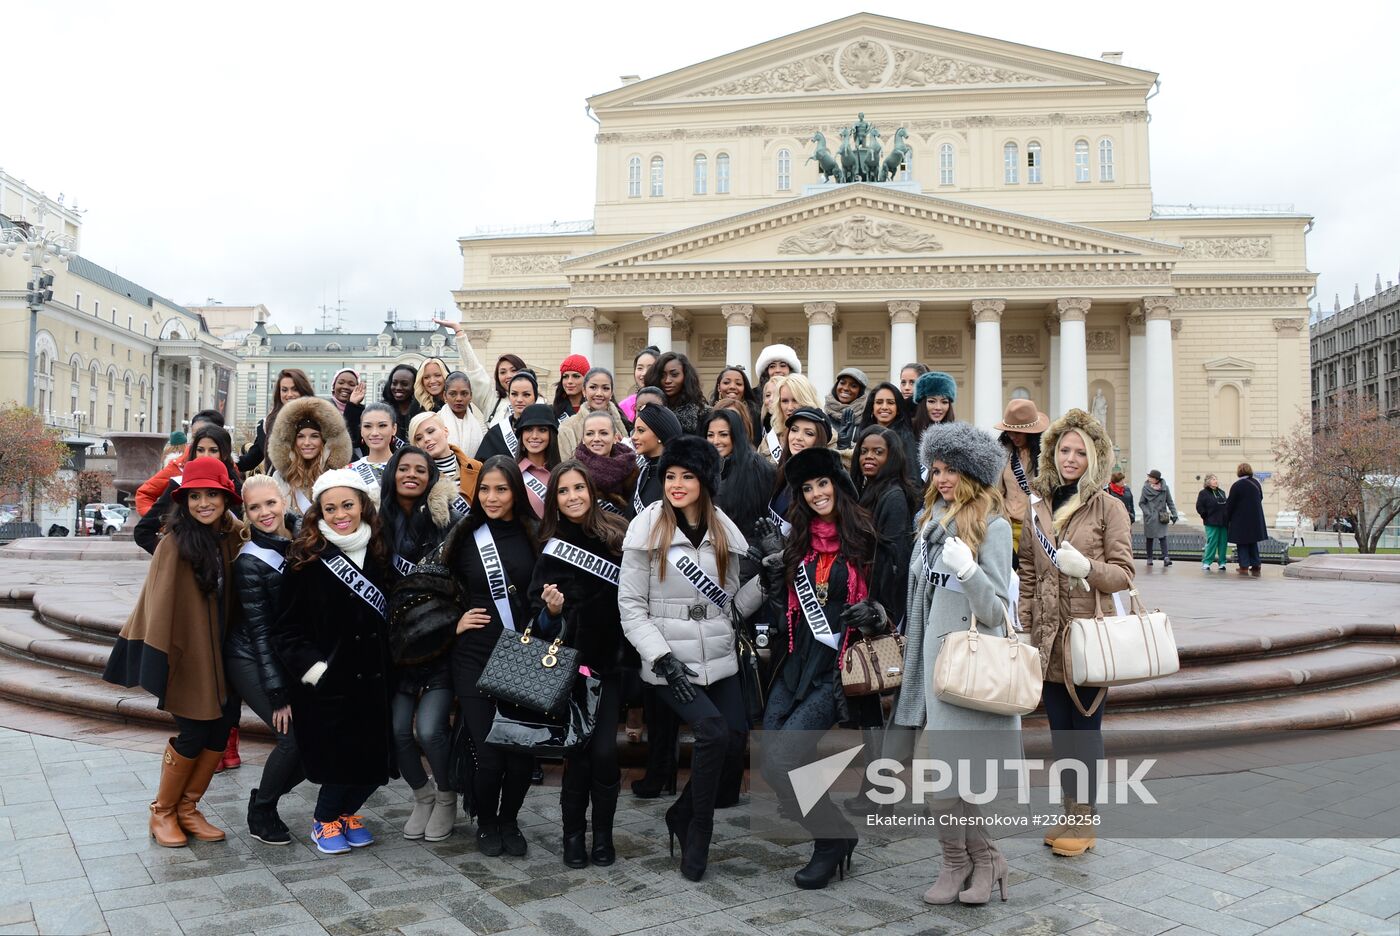 Outing for Miss Universe participants